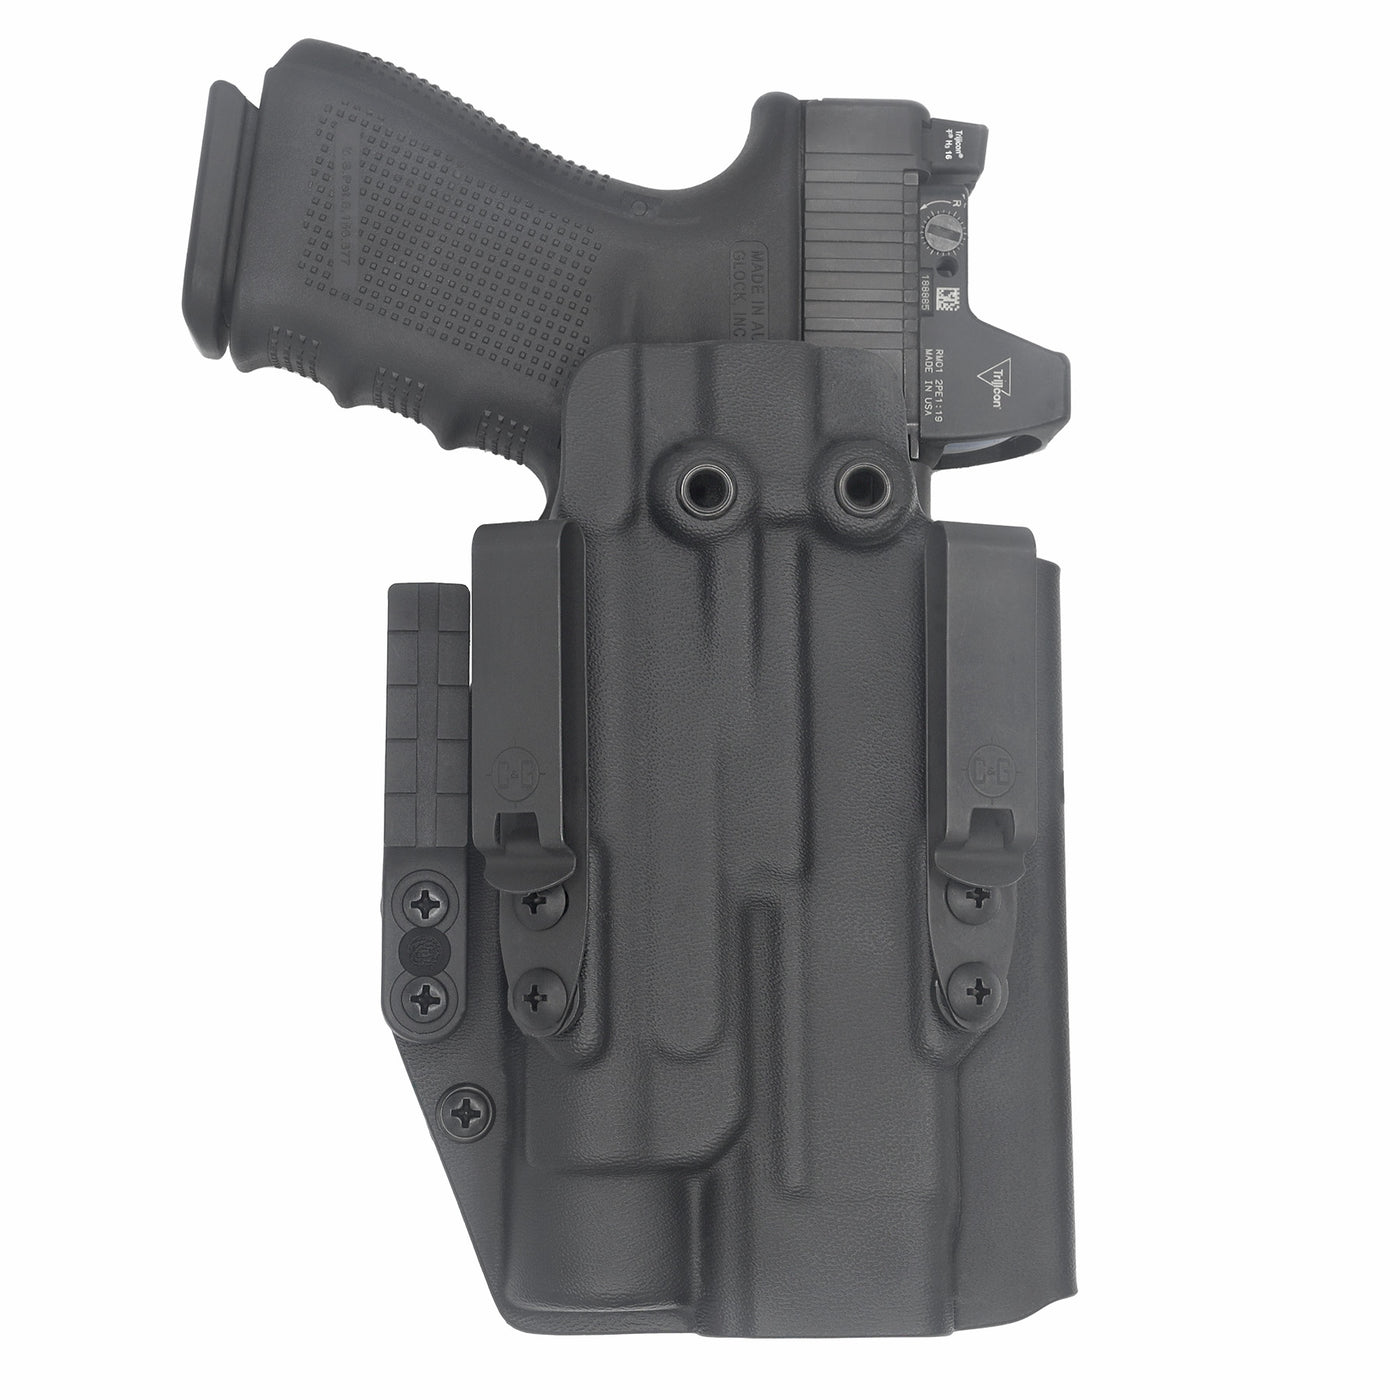 C&G Holsters Custom IWB Tactical ALPHA UPGRADE Poly80 Streamlight TLR1 in holstered position